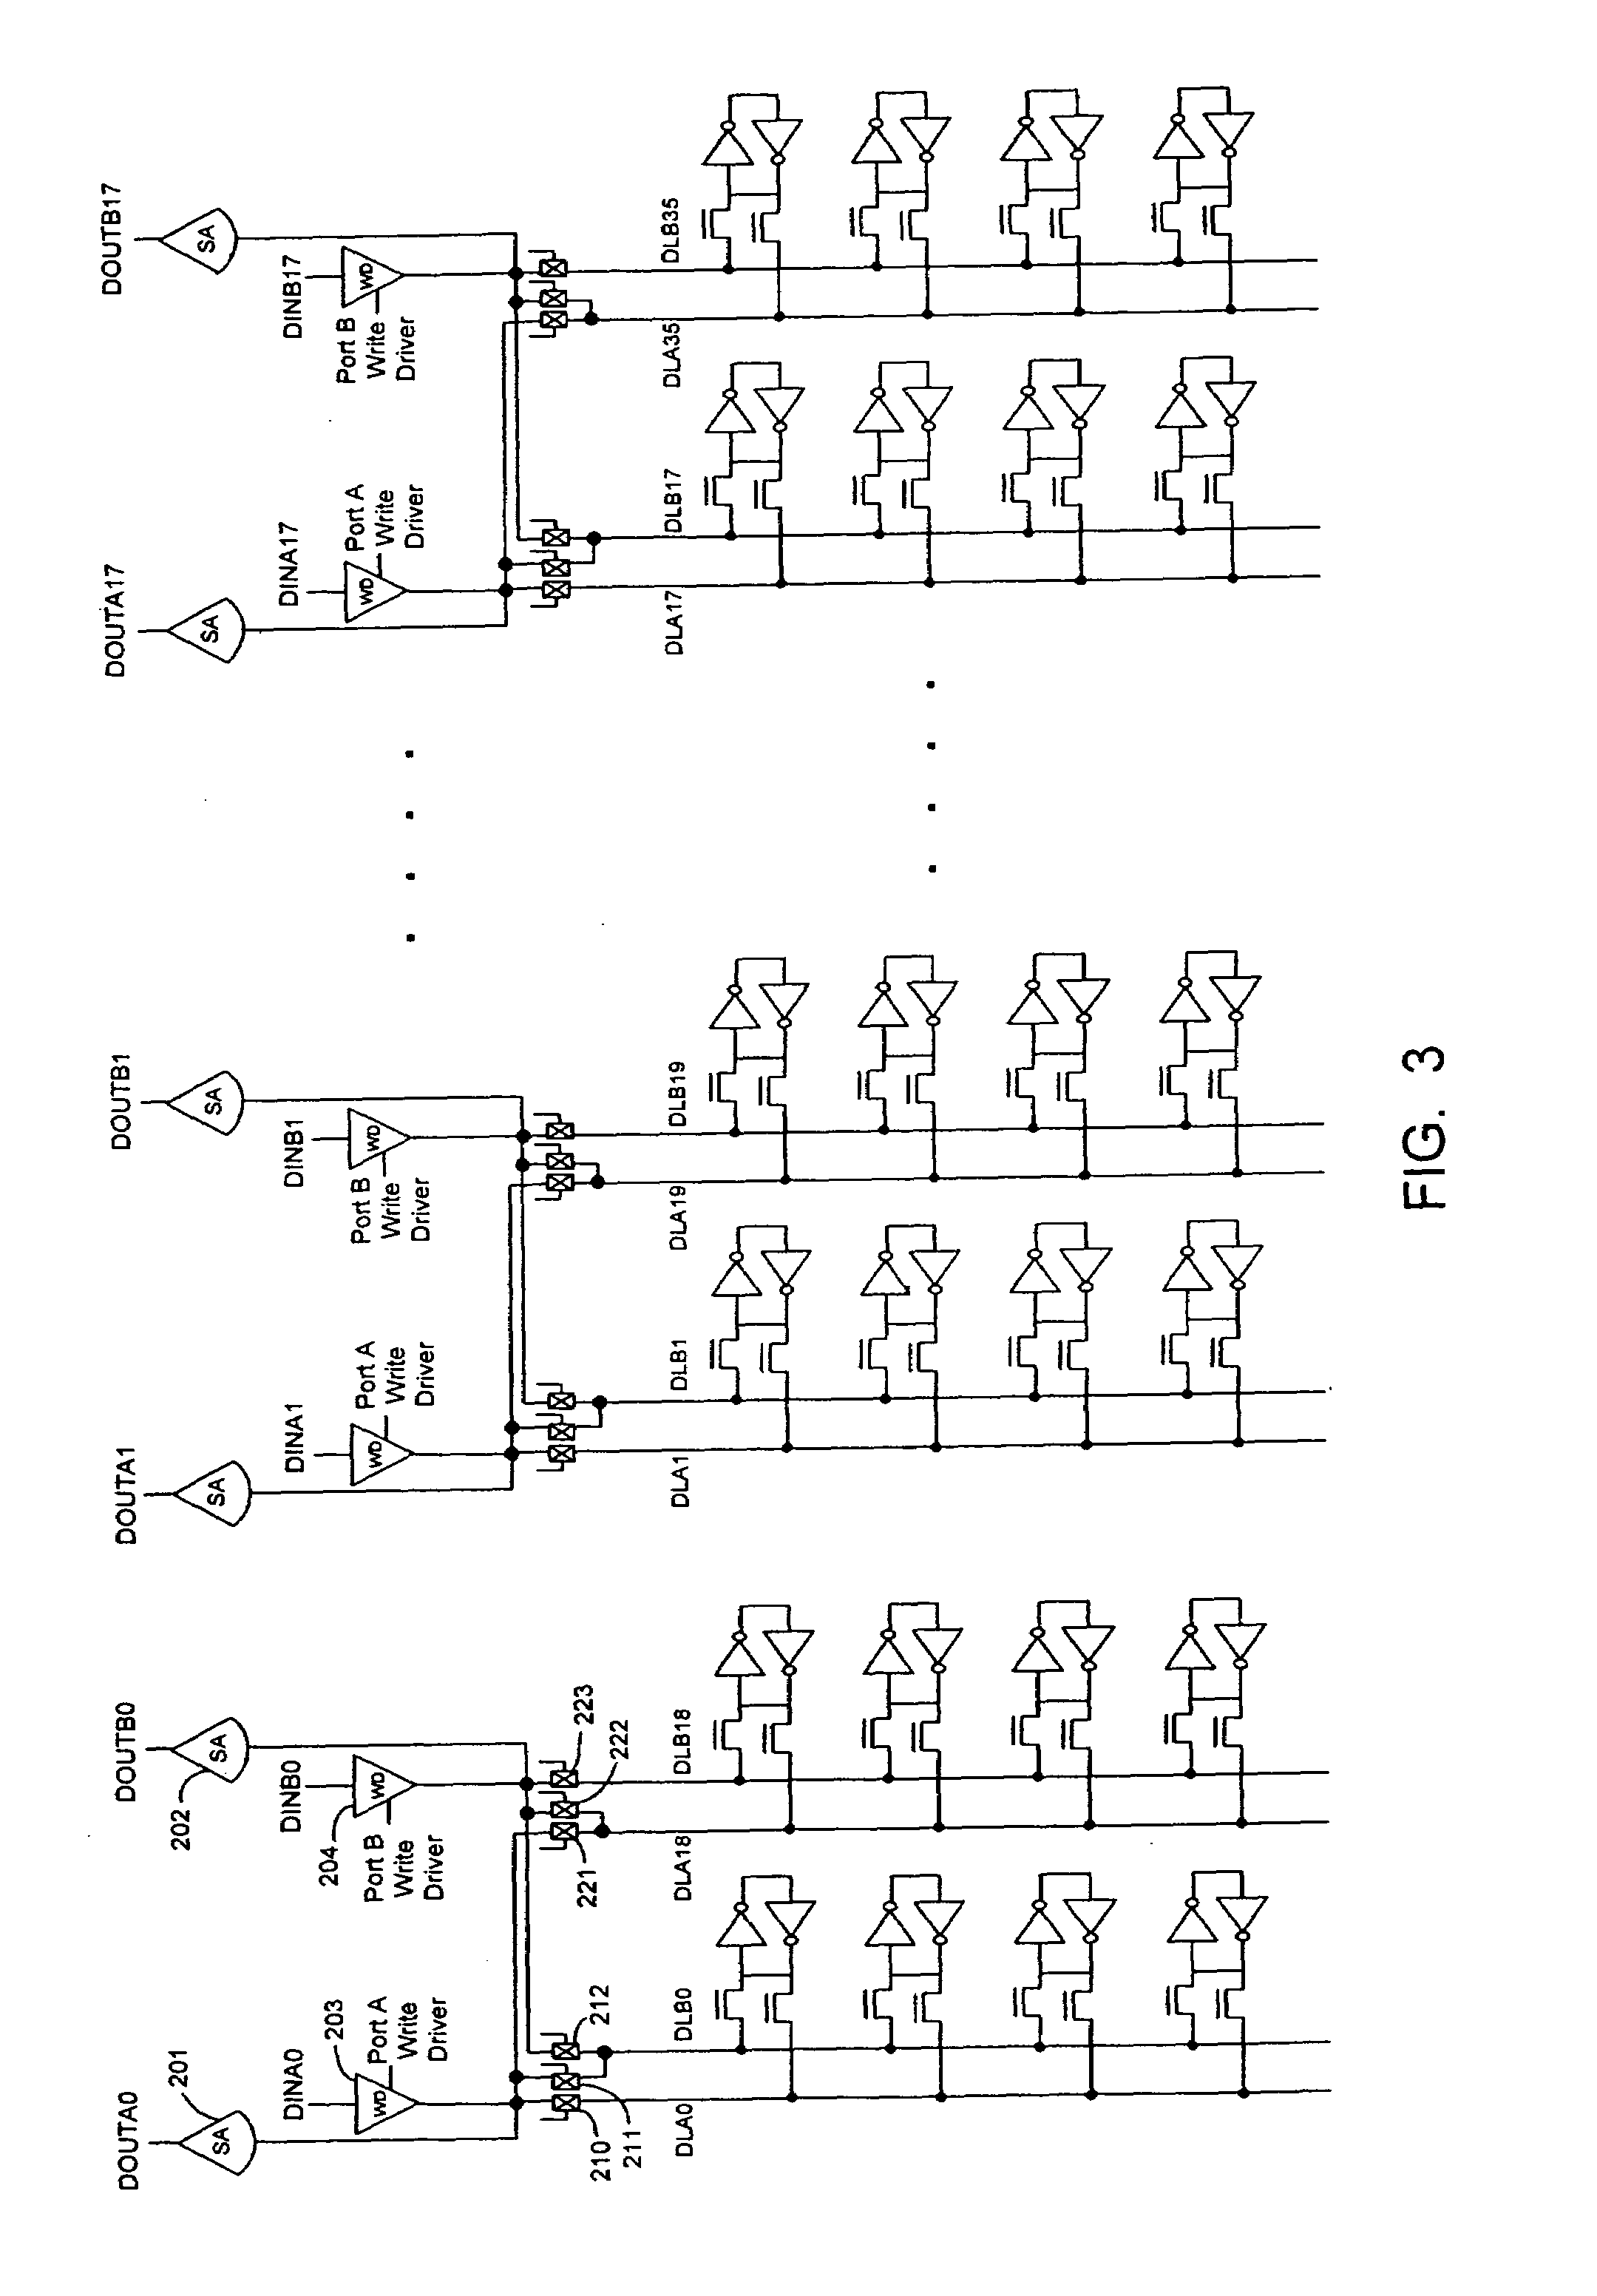 Dual-port memory array using shared write drivers and read sense amplifiers